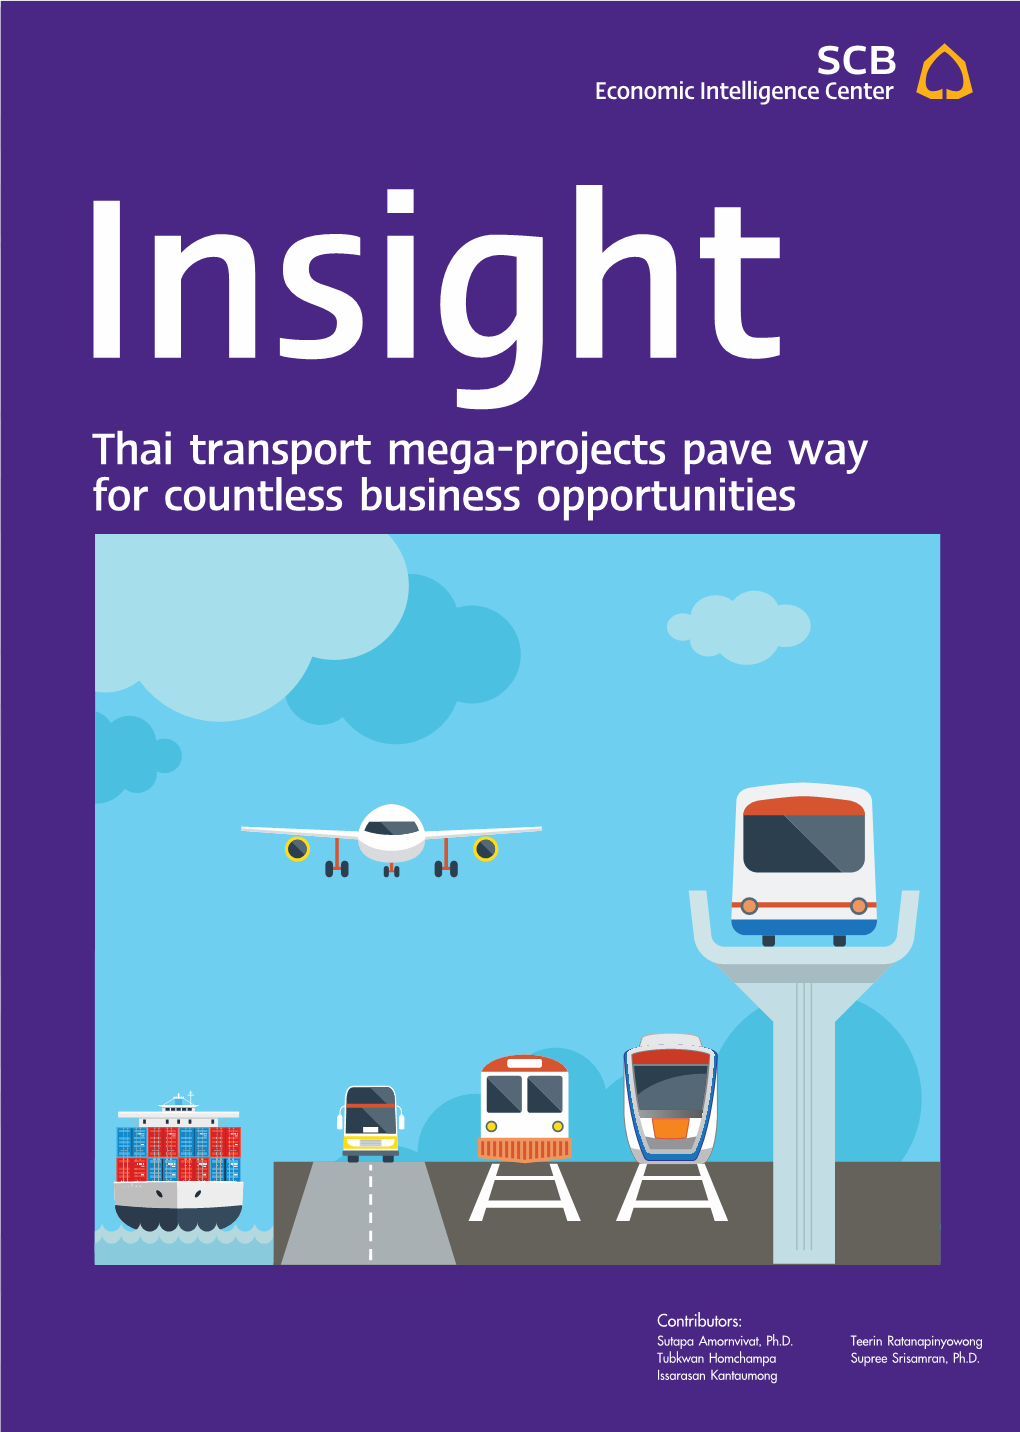 Thai Transport Mega-Projects Pave Way for Countless Business Opportunities